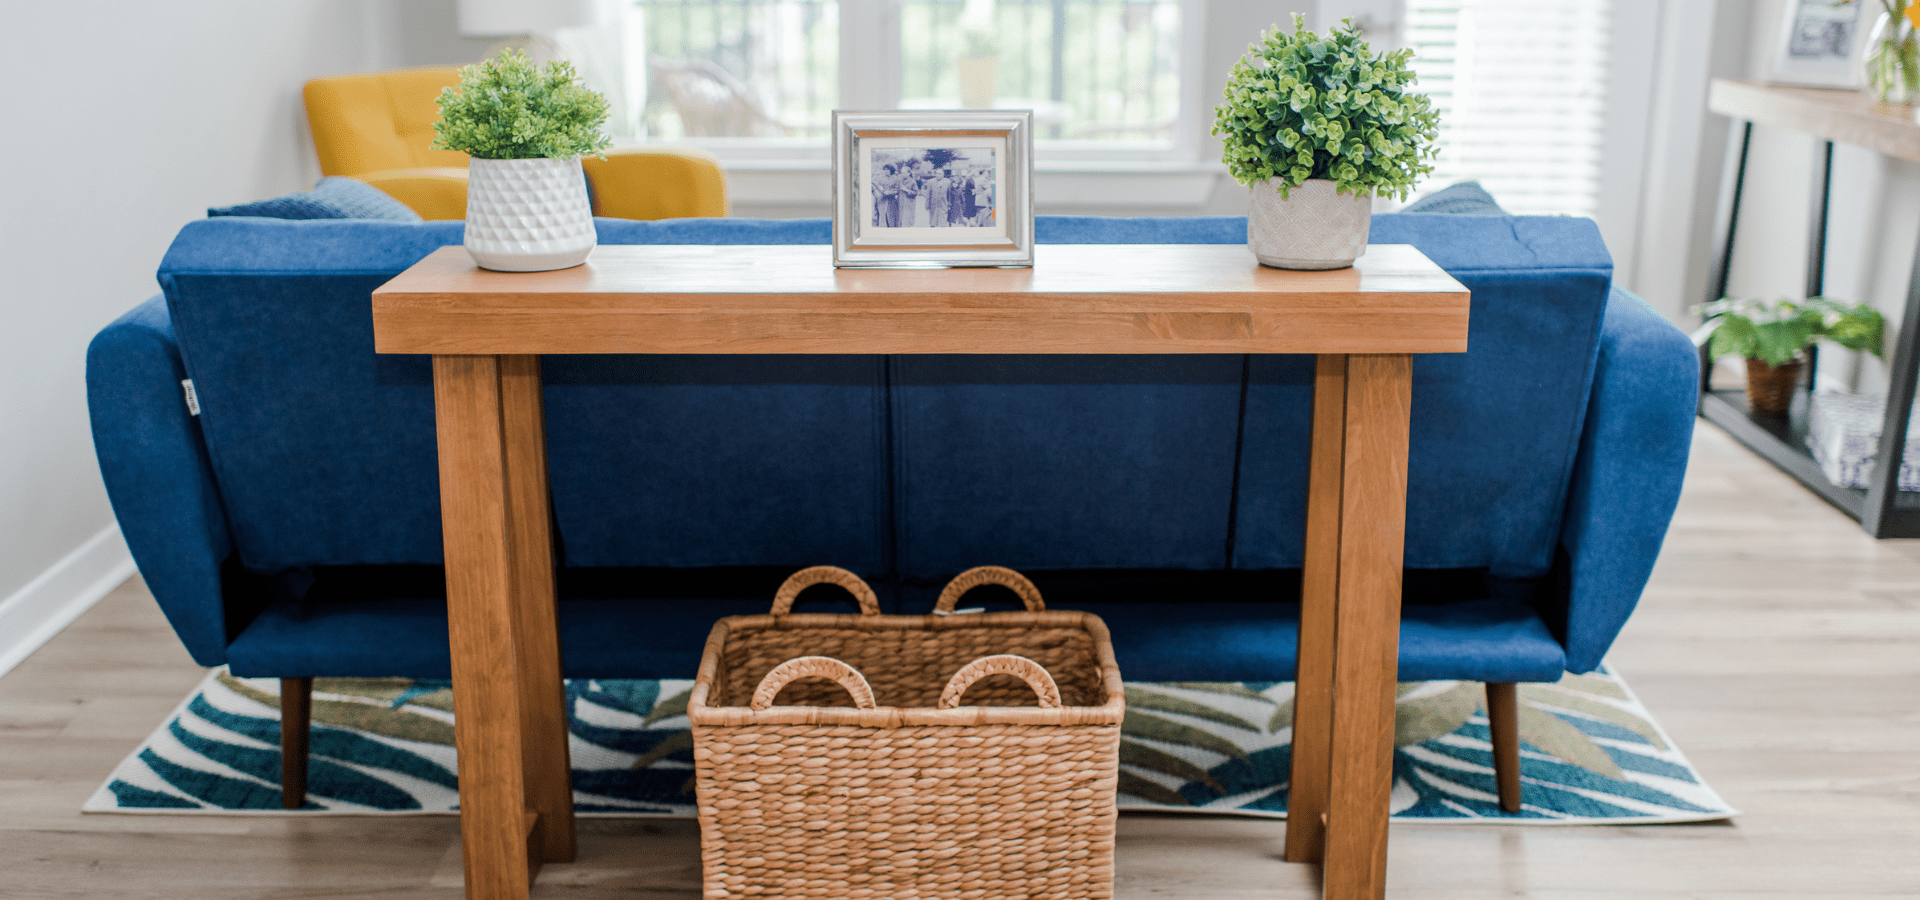 6 Tips for Choosing a Console Table